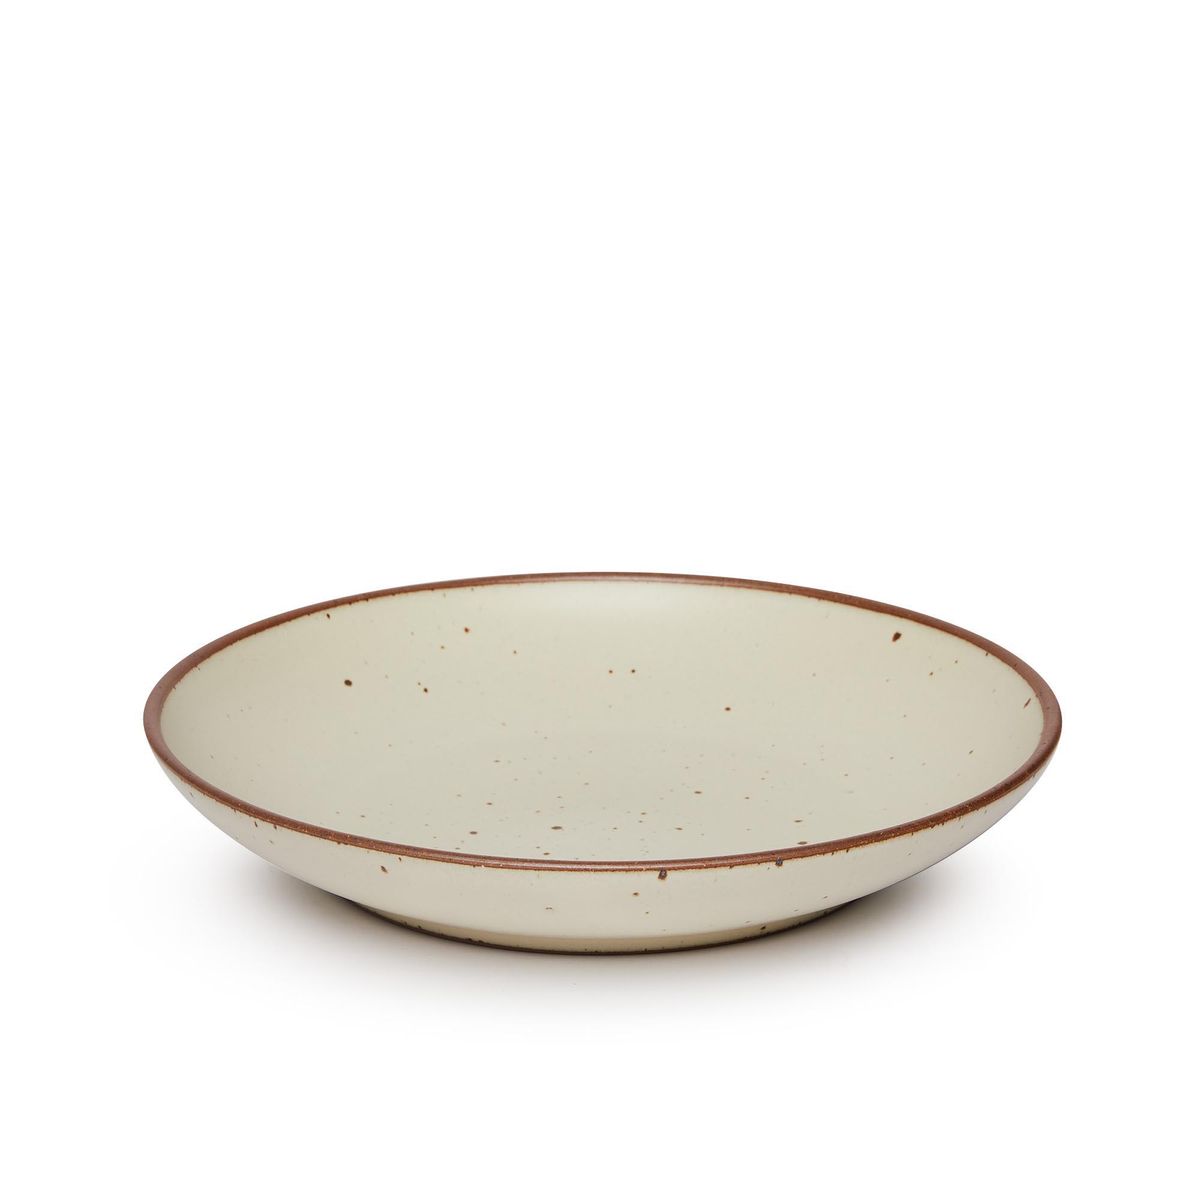 A large ceramic plate with a curved bowl edge in a warm, tan-toned, off-white color featuring iron speckles and an unglazed rim.